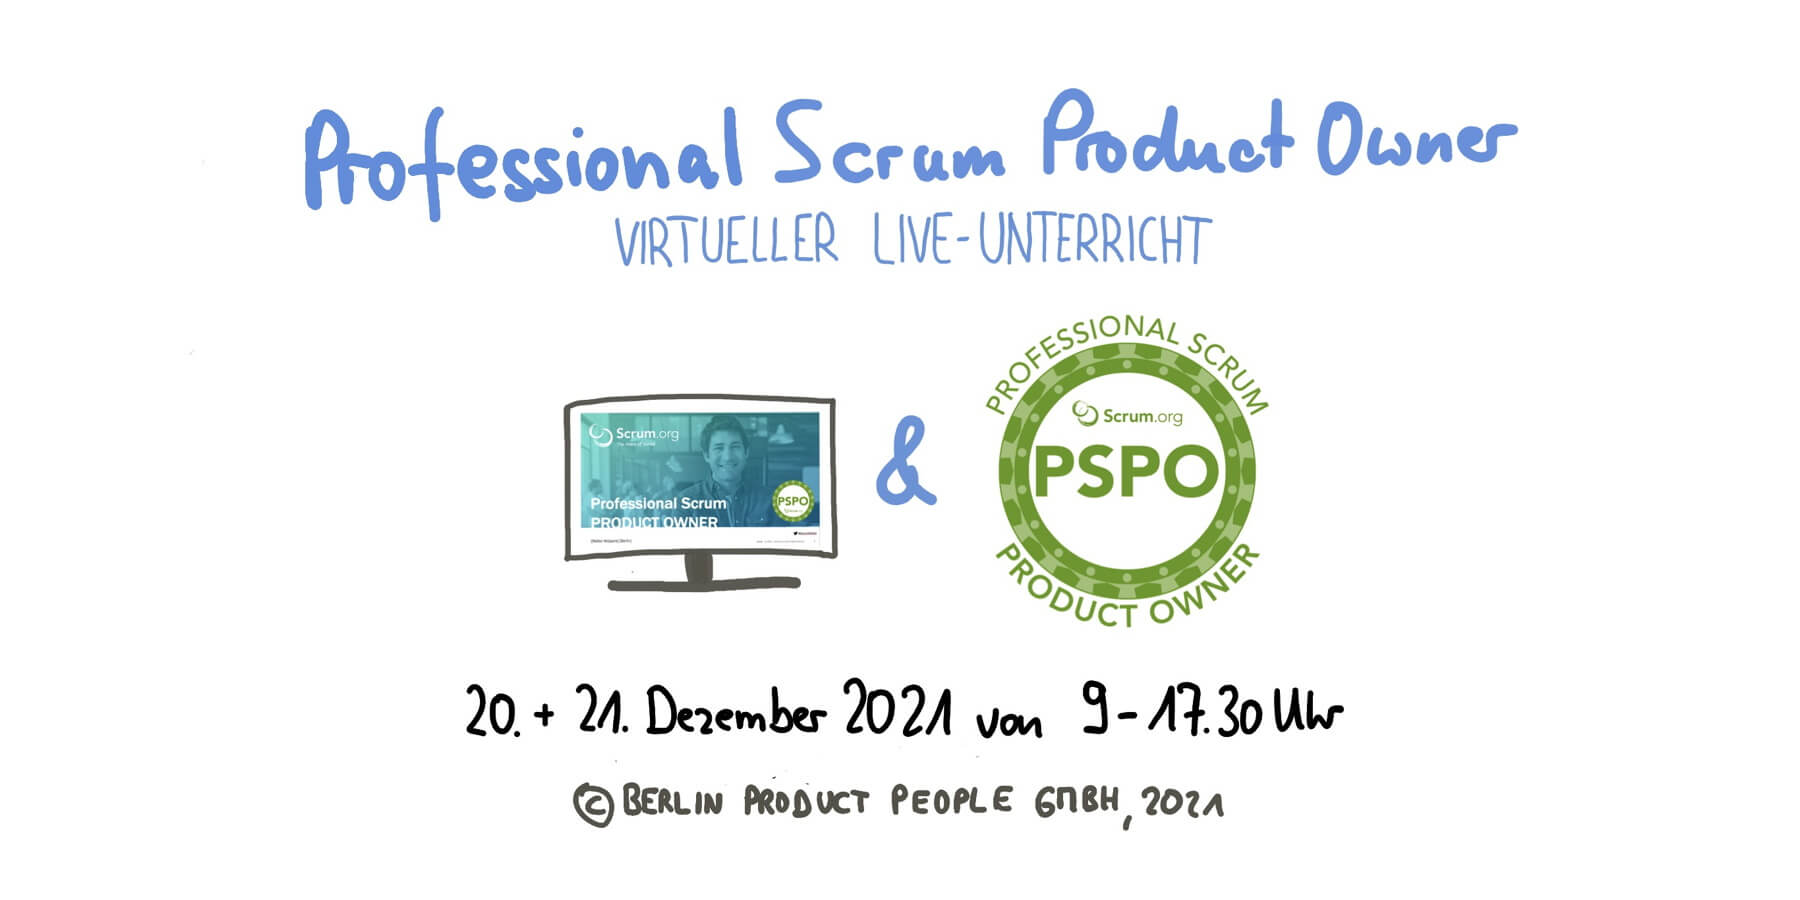 Professional Scrum Product Owner Training w/ PSPO Certificate — Online: December 20-21, 2021 — Berlin Product People GmbH